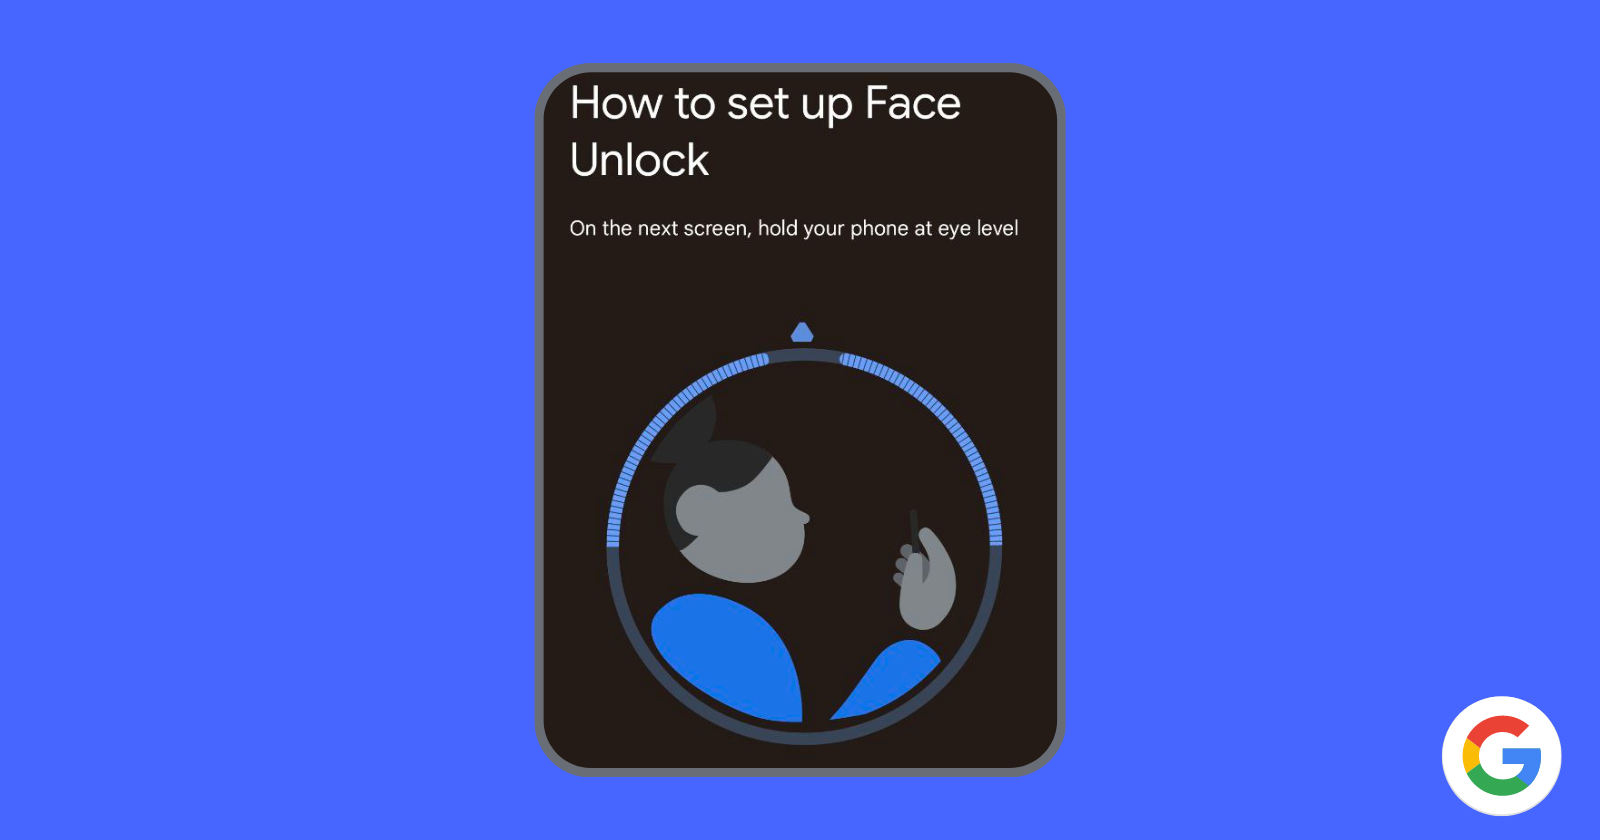 Guide to set up Face Unlock on Google Pixel phones